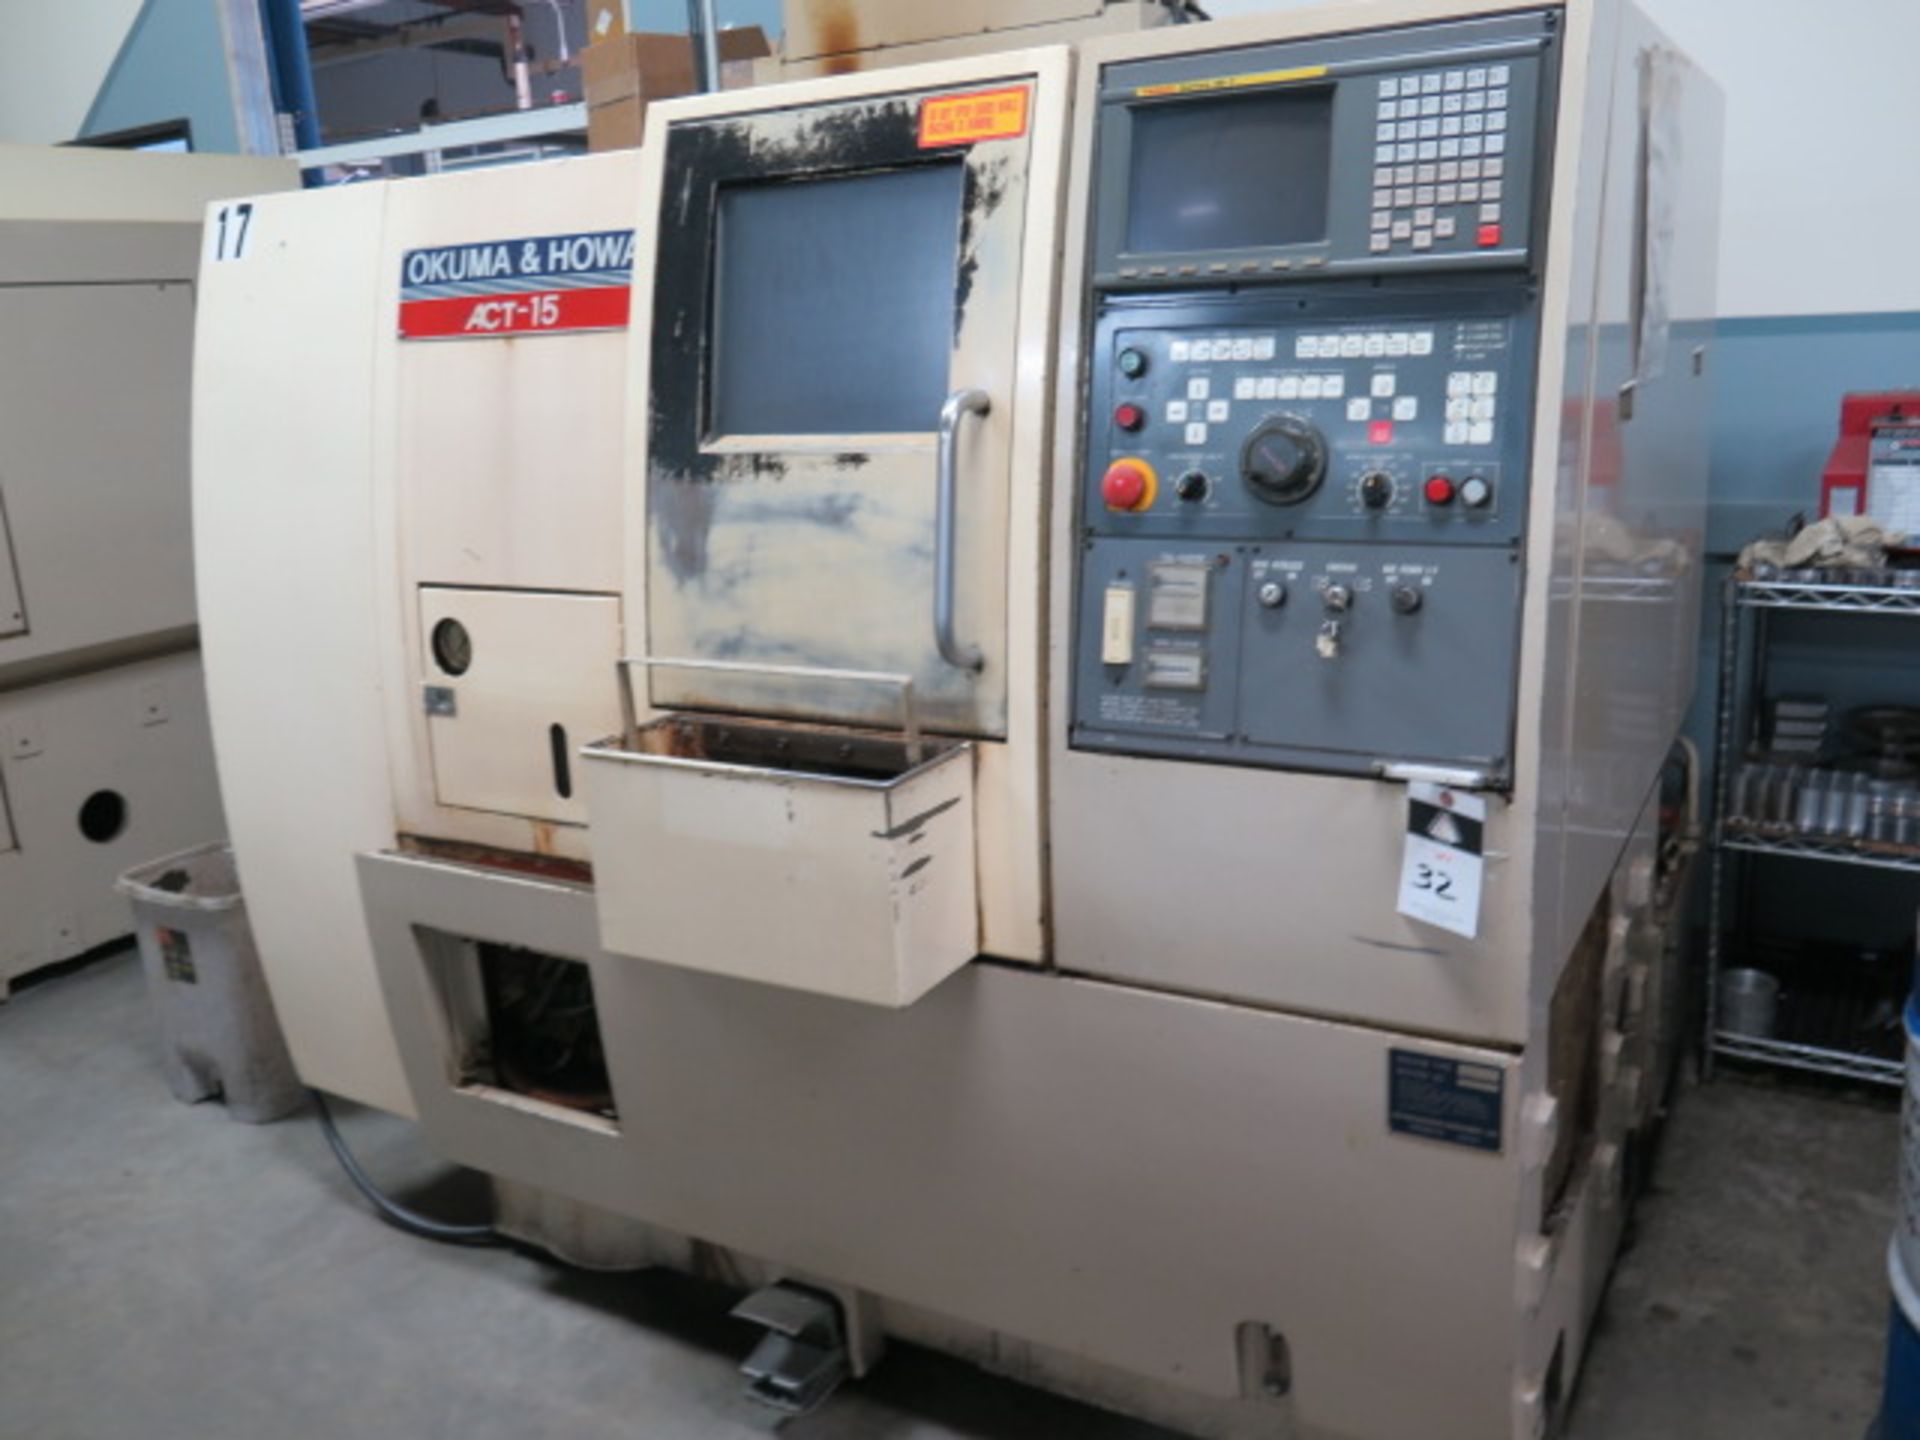 Okuma & Howa ACT-15 CNC Turning Center s/n 00082 w/ Fanuc 18-T Controls,8-Station Turret, SOLD AS IS - Image 2 of 11